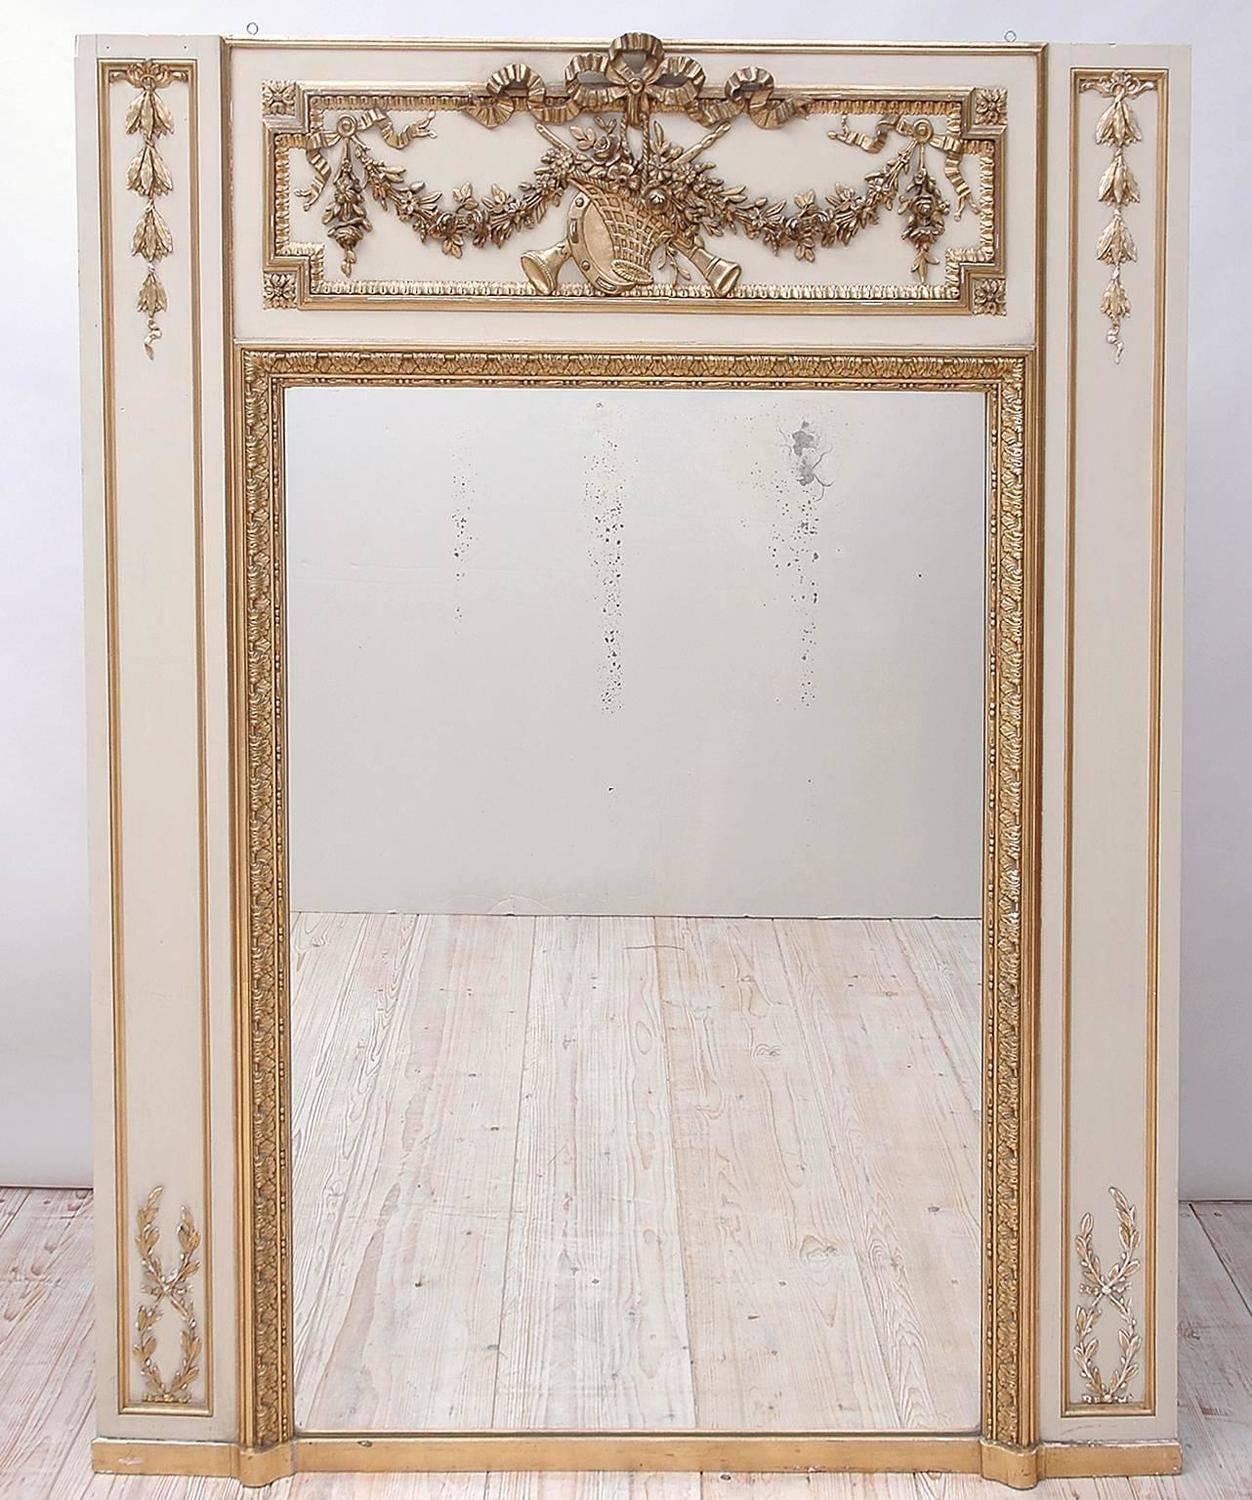 This French Regency style trumeau panel would have been a part of a room from a hôtel possibly in Lyon or Paris.